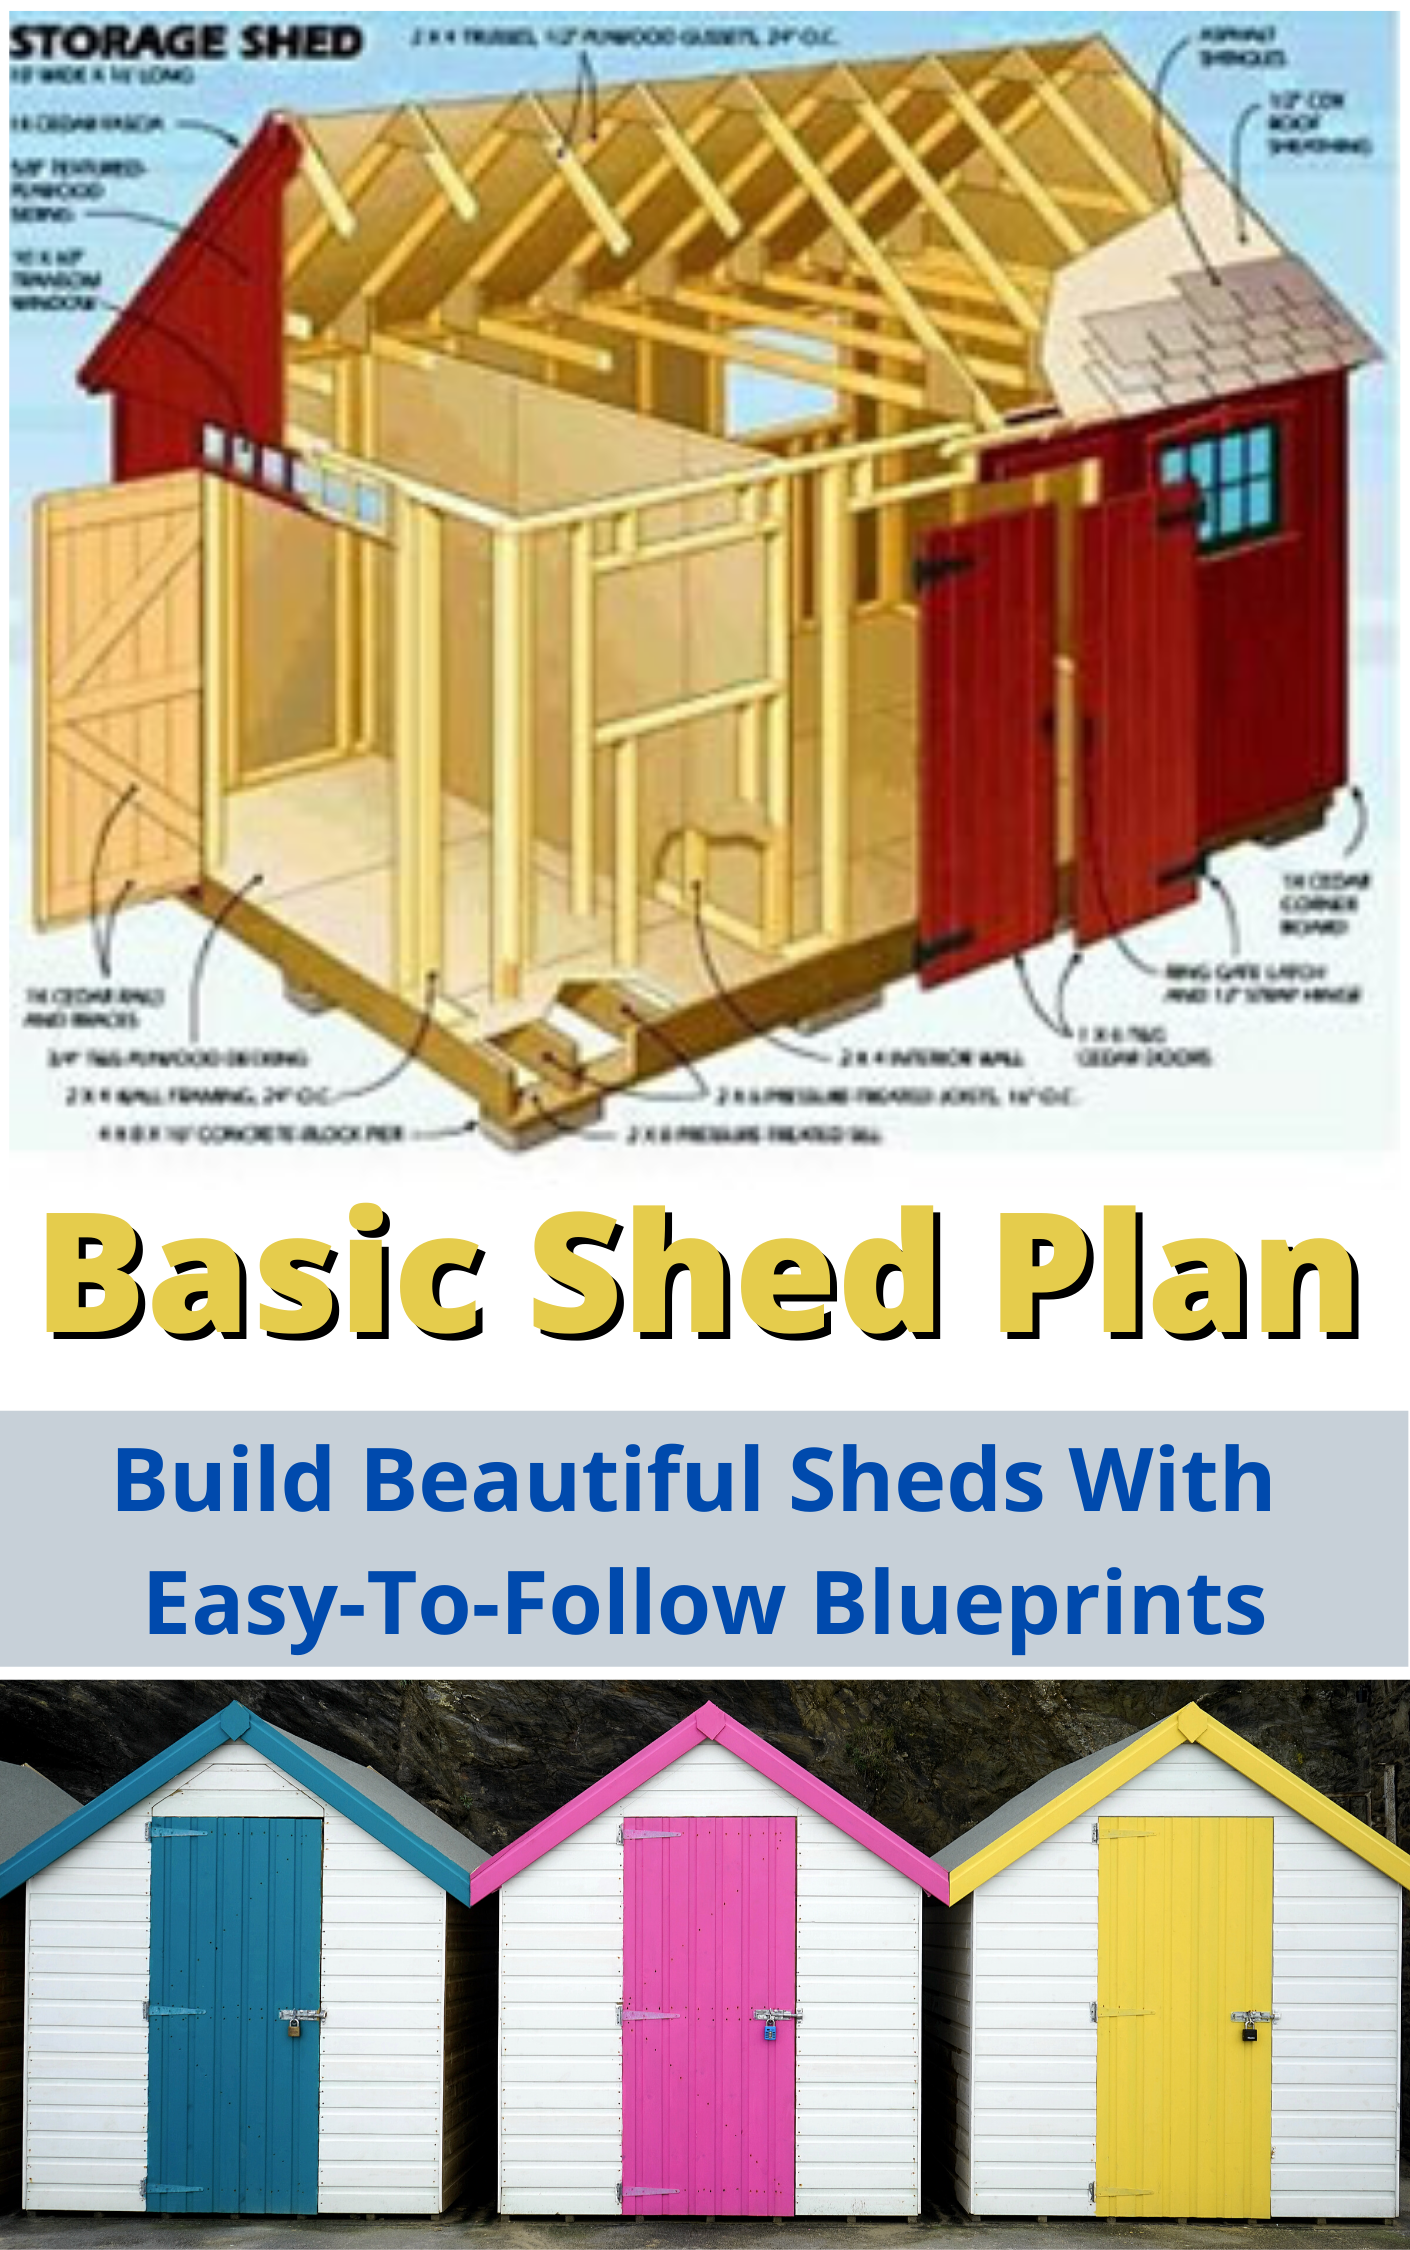 my-shed-plan-ebook-cover